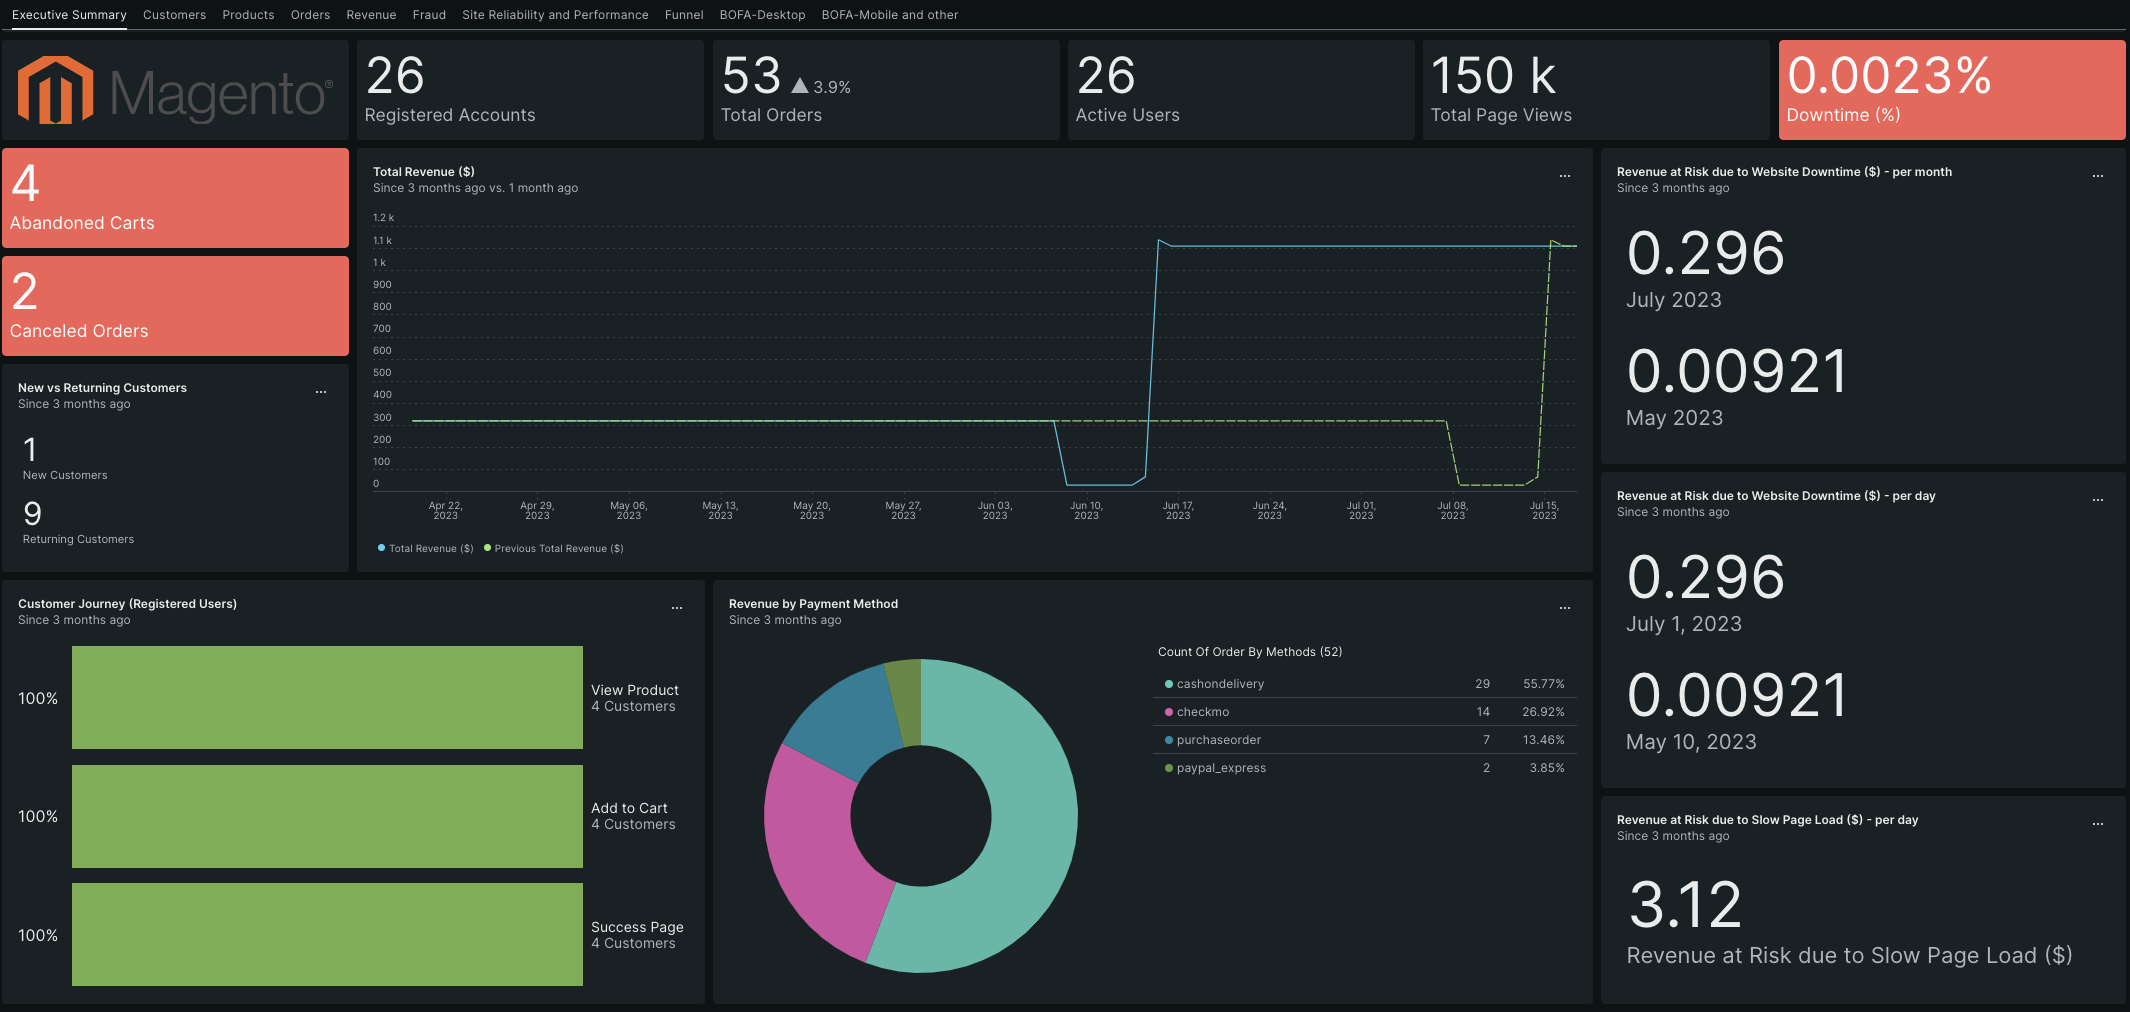 A screenshot of a dashboard with a variety of graphs and charts showing data about a Magento ecommerce application.